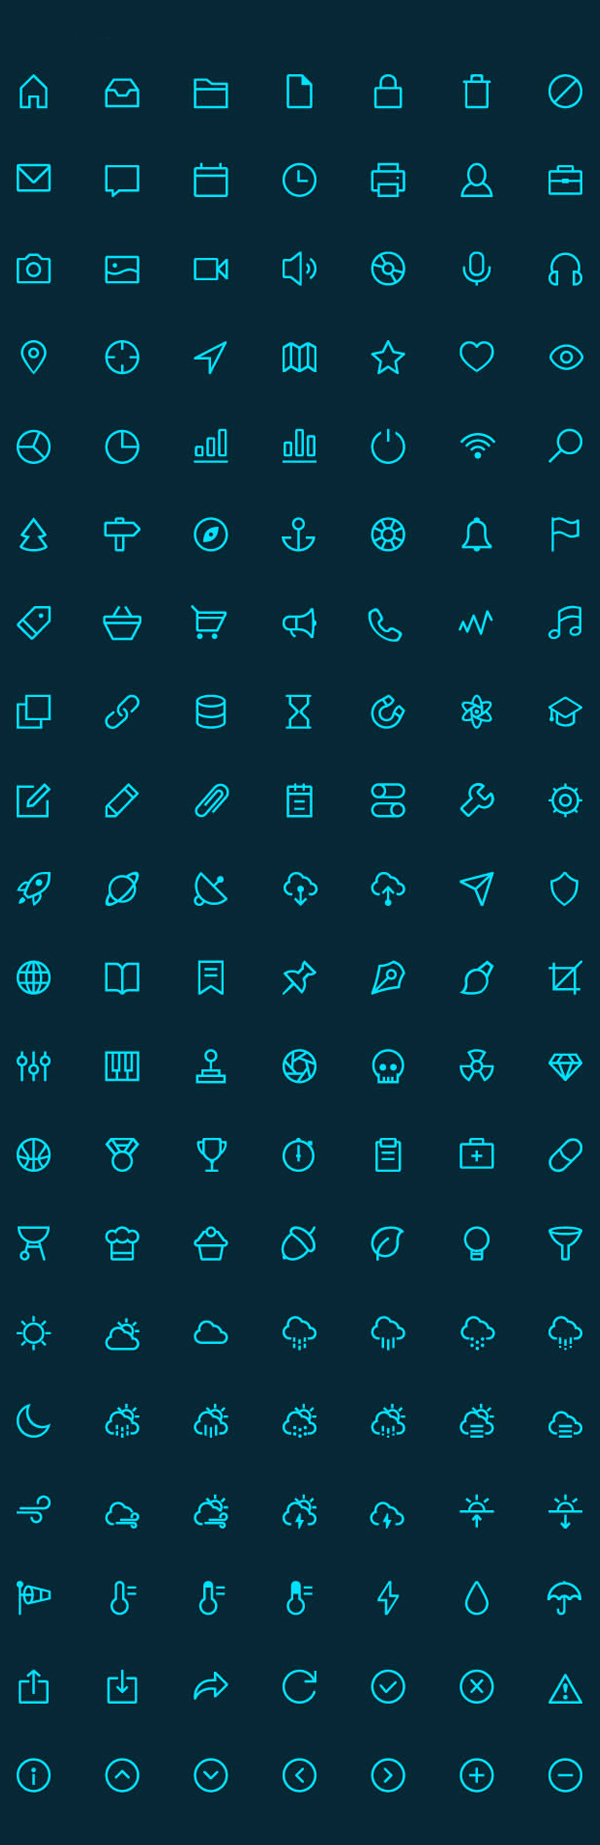 Free Linear Icons Vector Set (140 Icons)